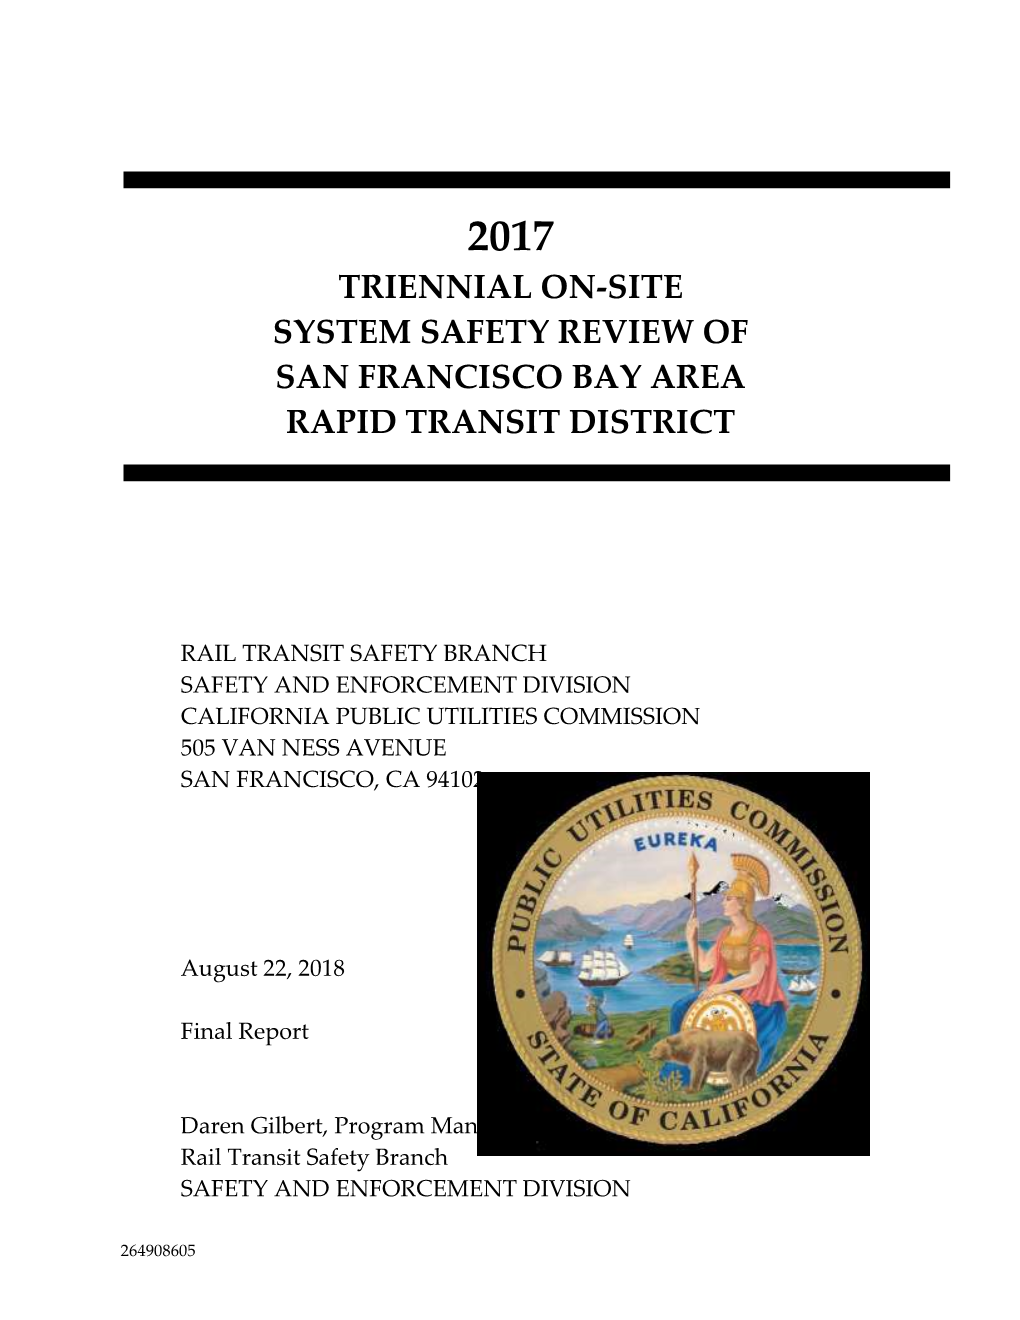 Triennial On-Site System Safety Review of San Francisco Bay Area Rapid Transit District